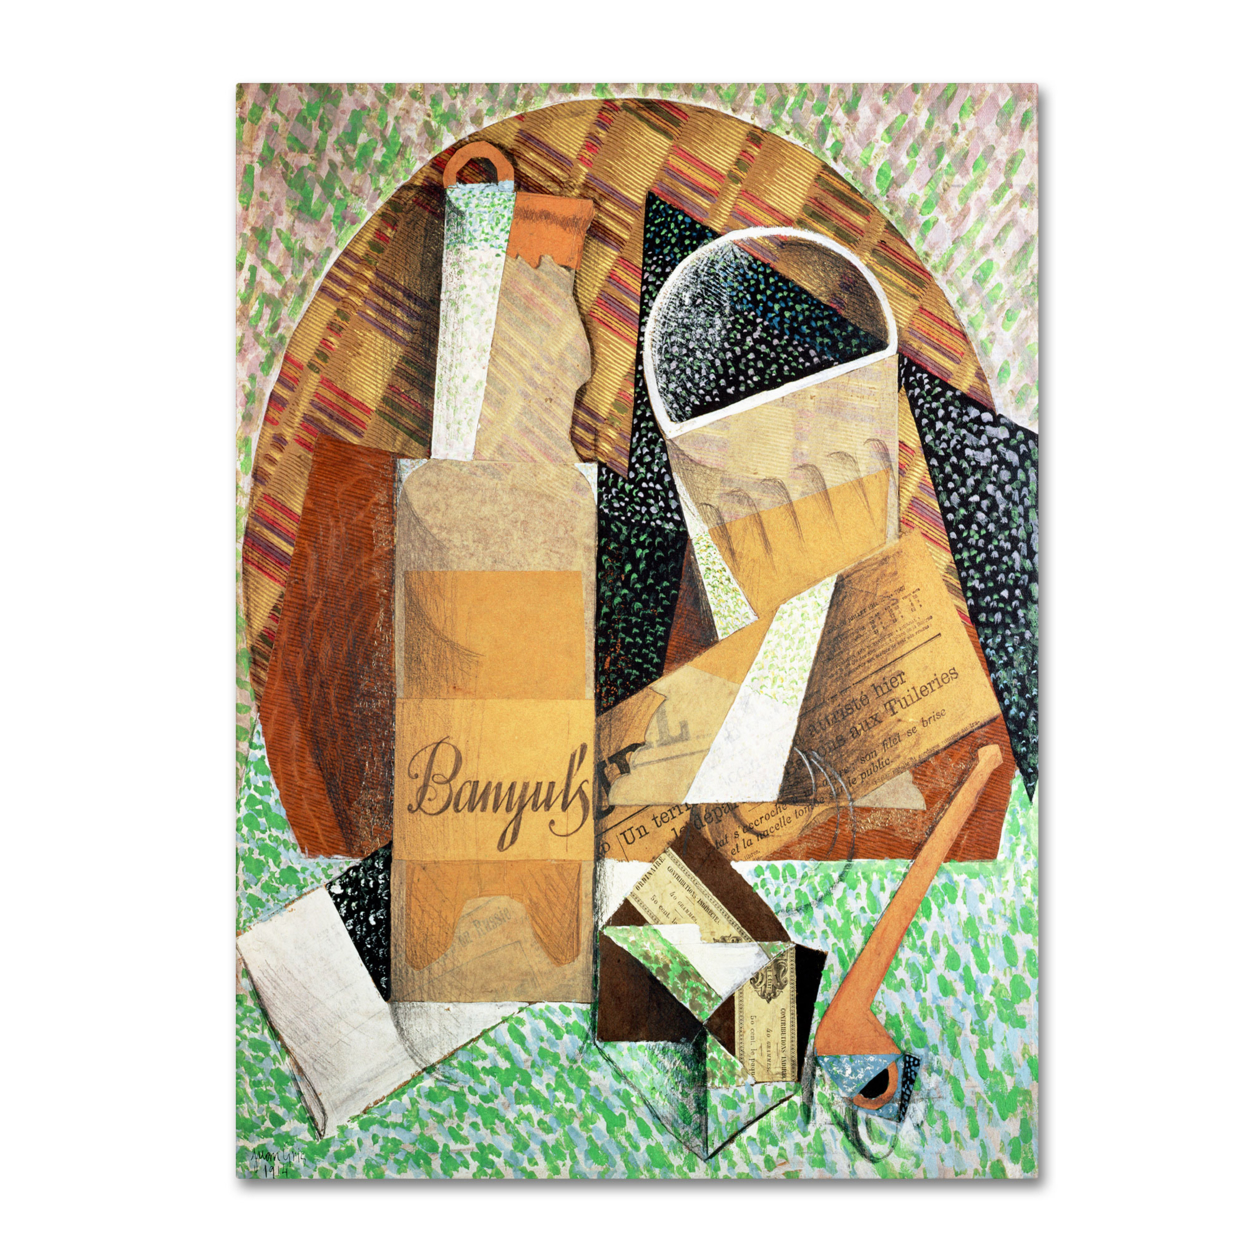 Juan Gris 'The Bottle Of Banyuls 1914' Canvas Wall Art 35 X 47 Inches